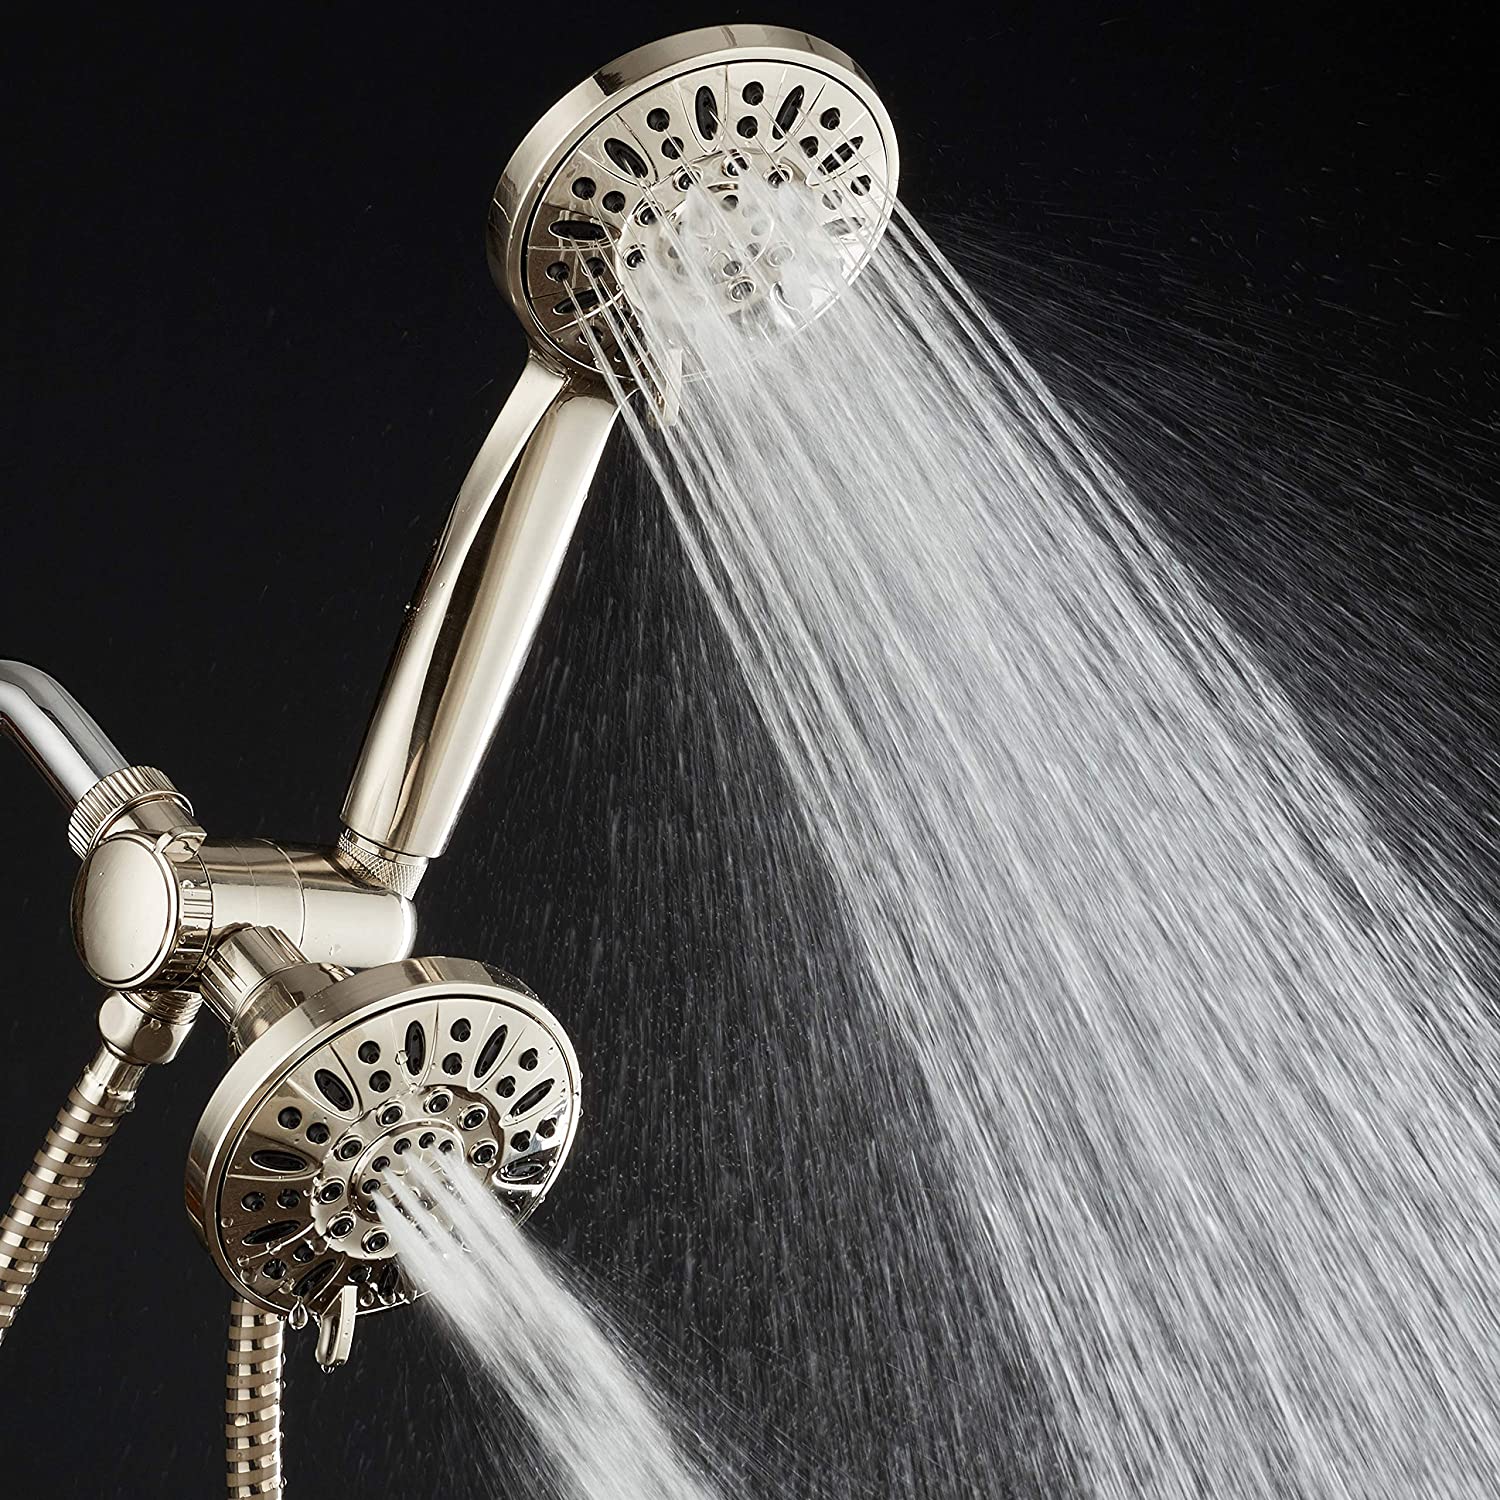 12 Best Dual Shower Heads InDetail Reviews (Aug. 2021)